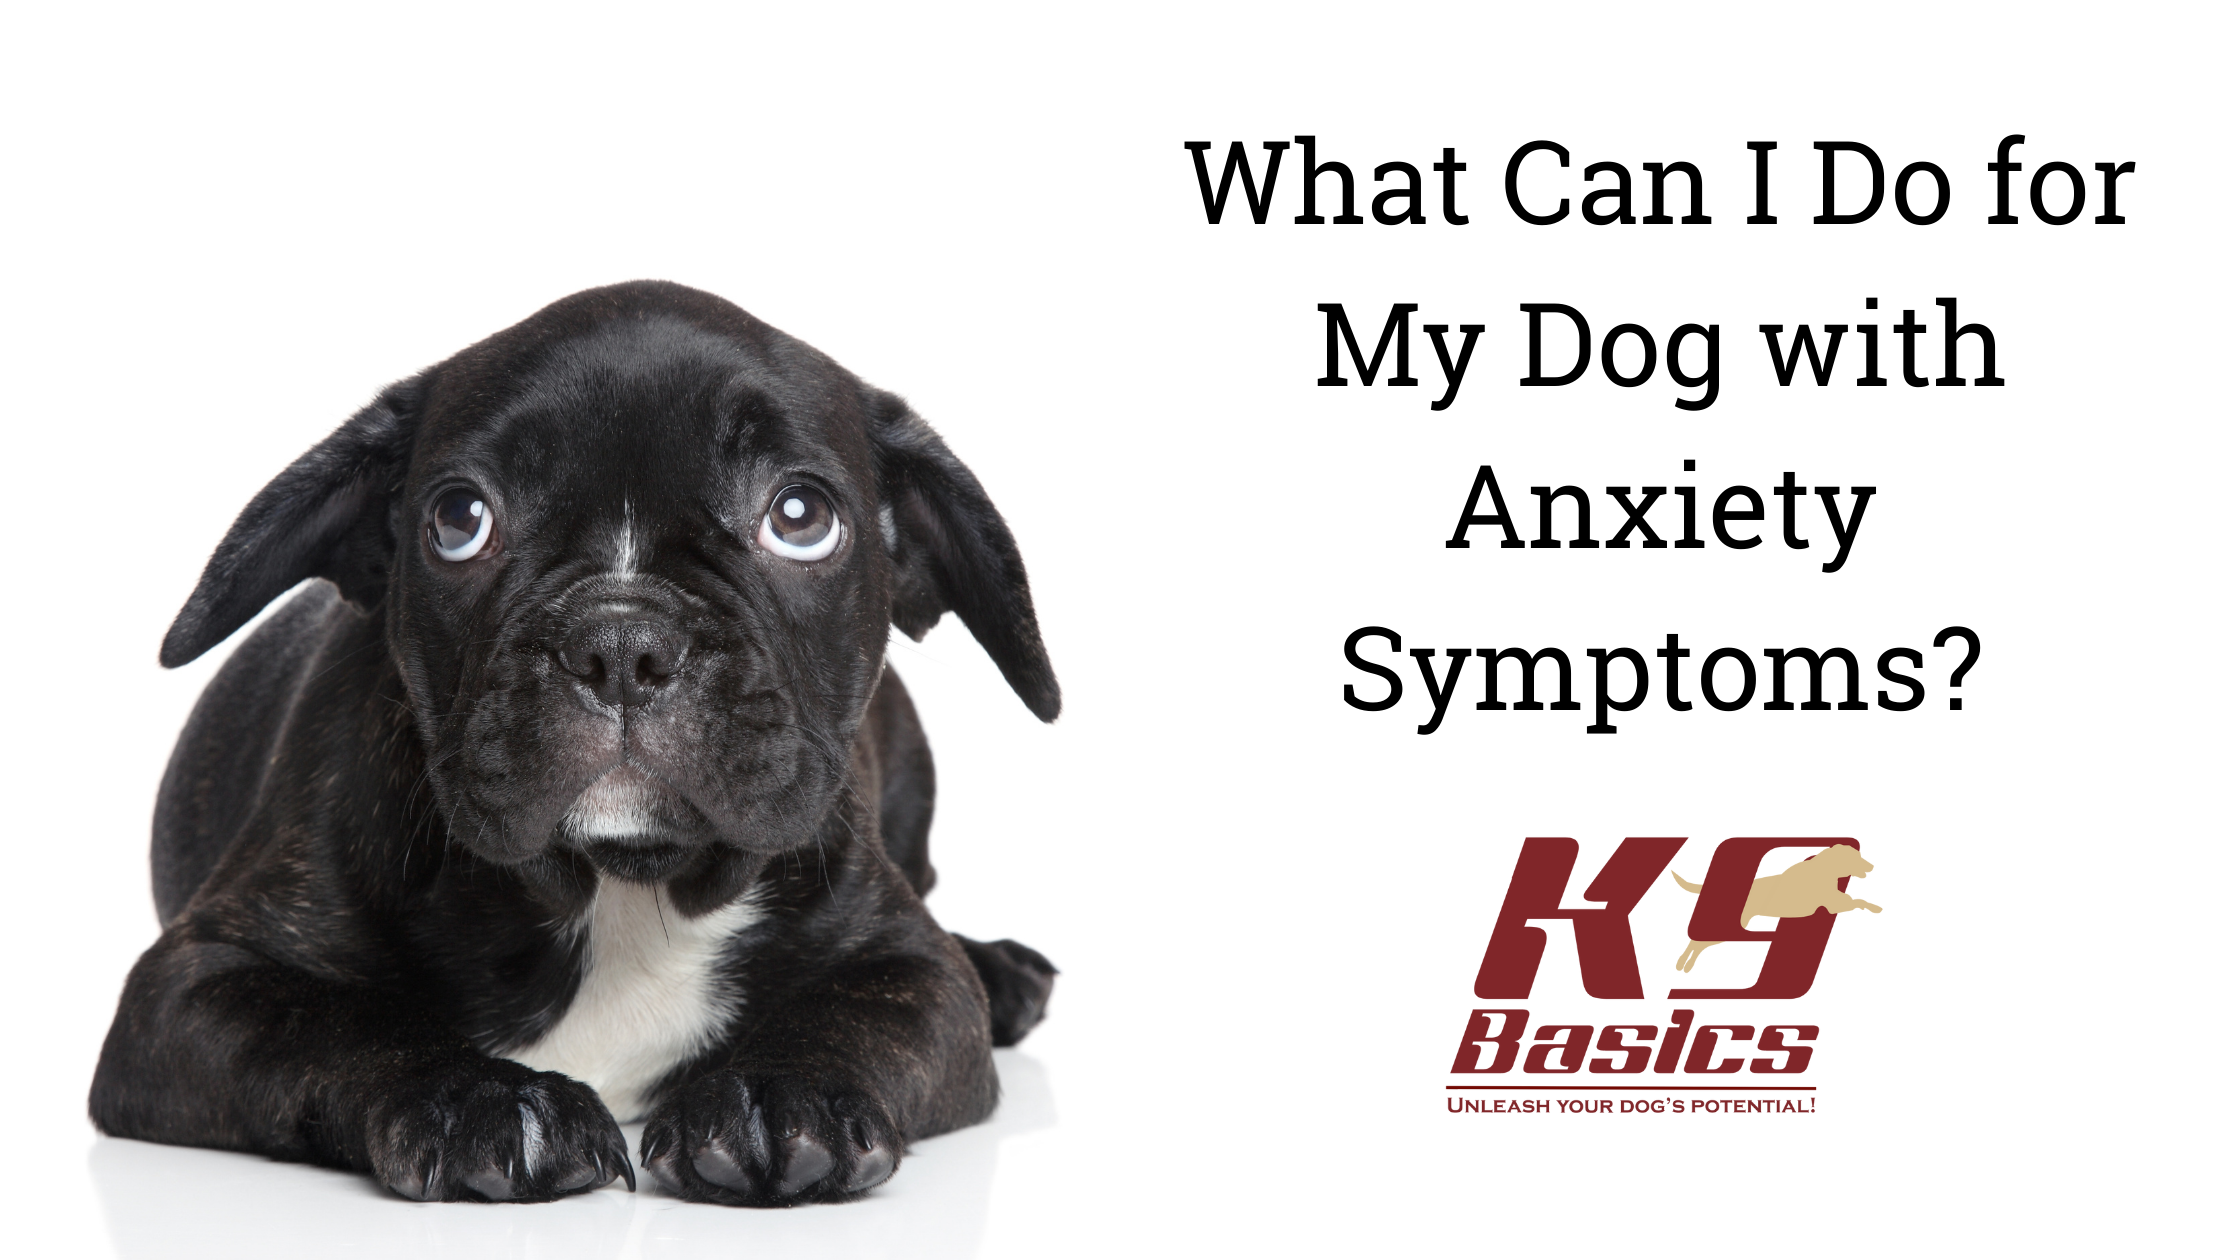 What Can I Do for My Dog with Anxiety Symptoms?